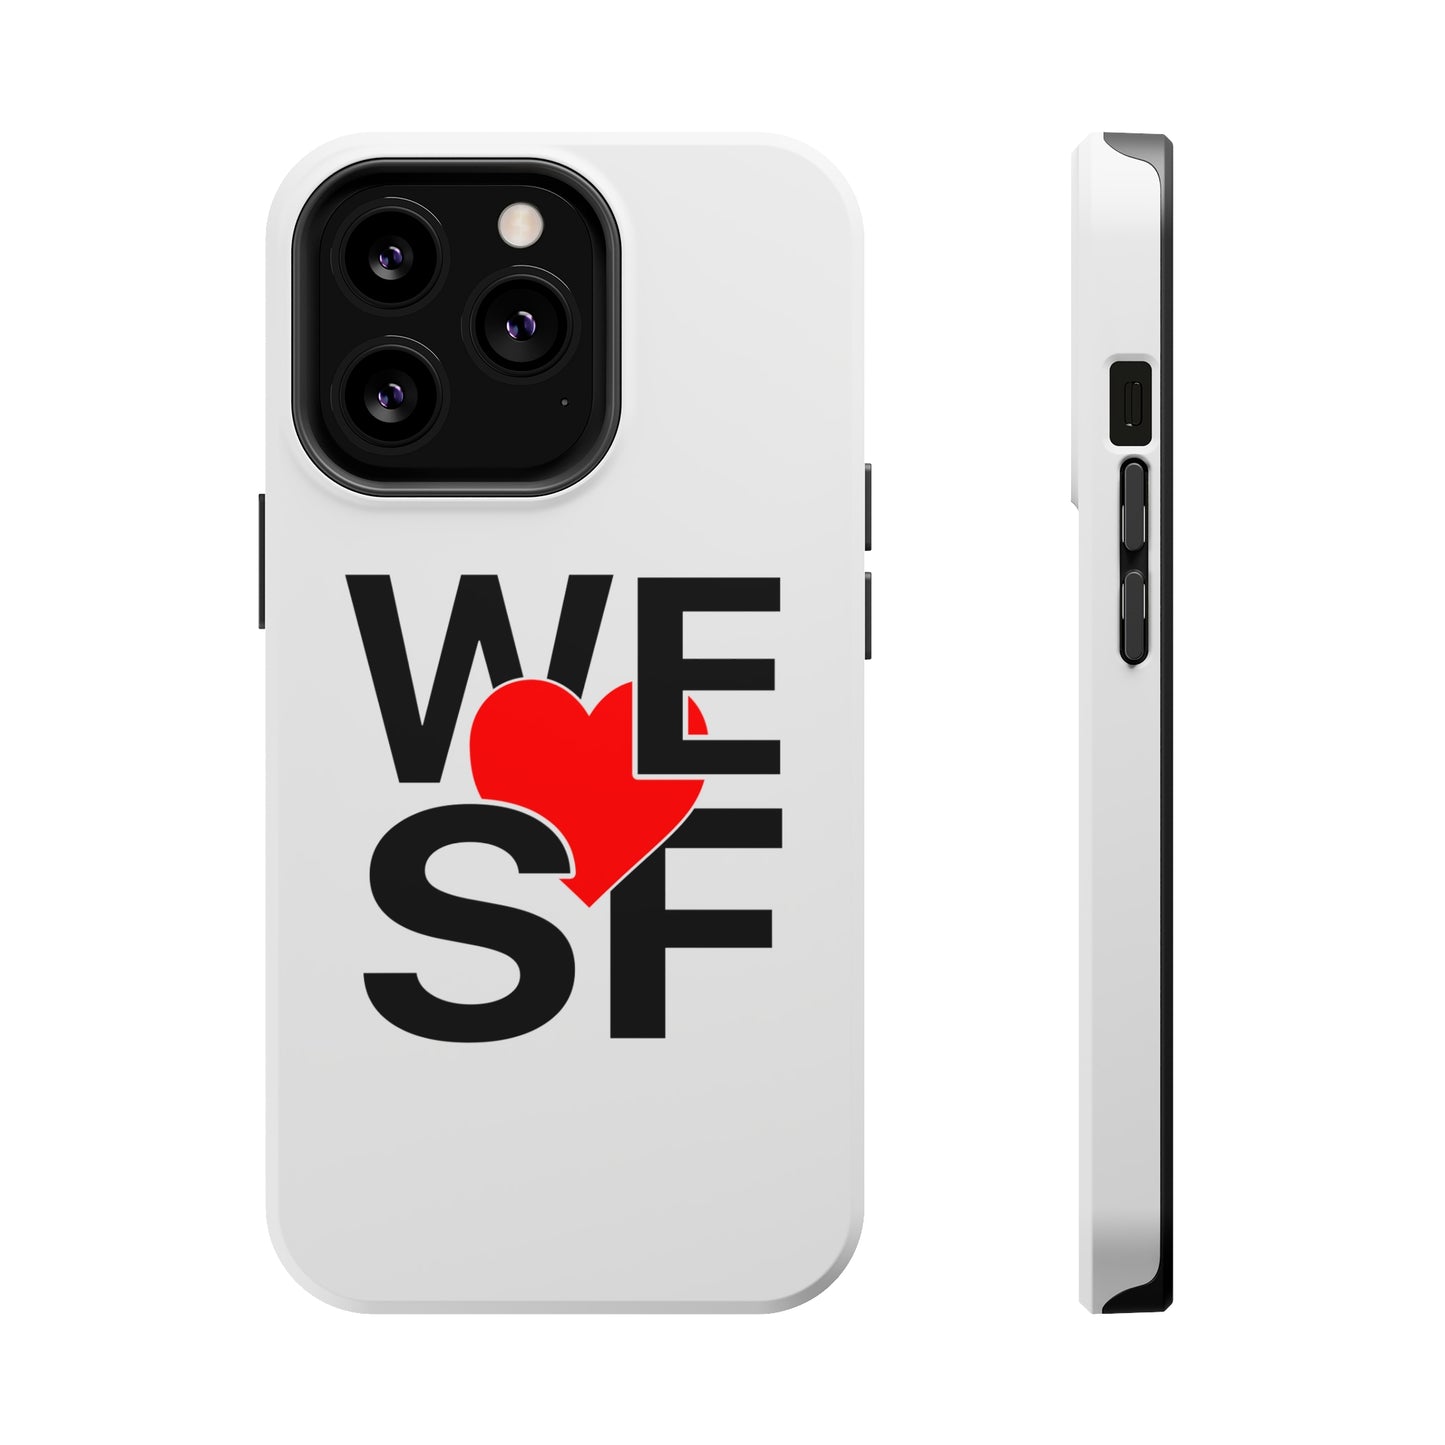 welovesf - MagSafe Tough Case for iPhone